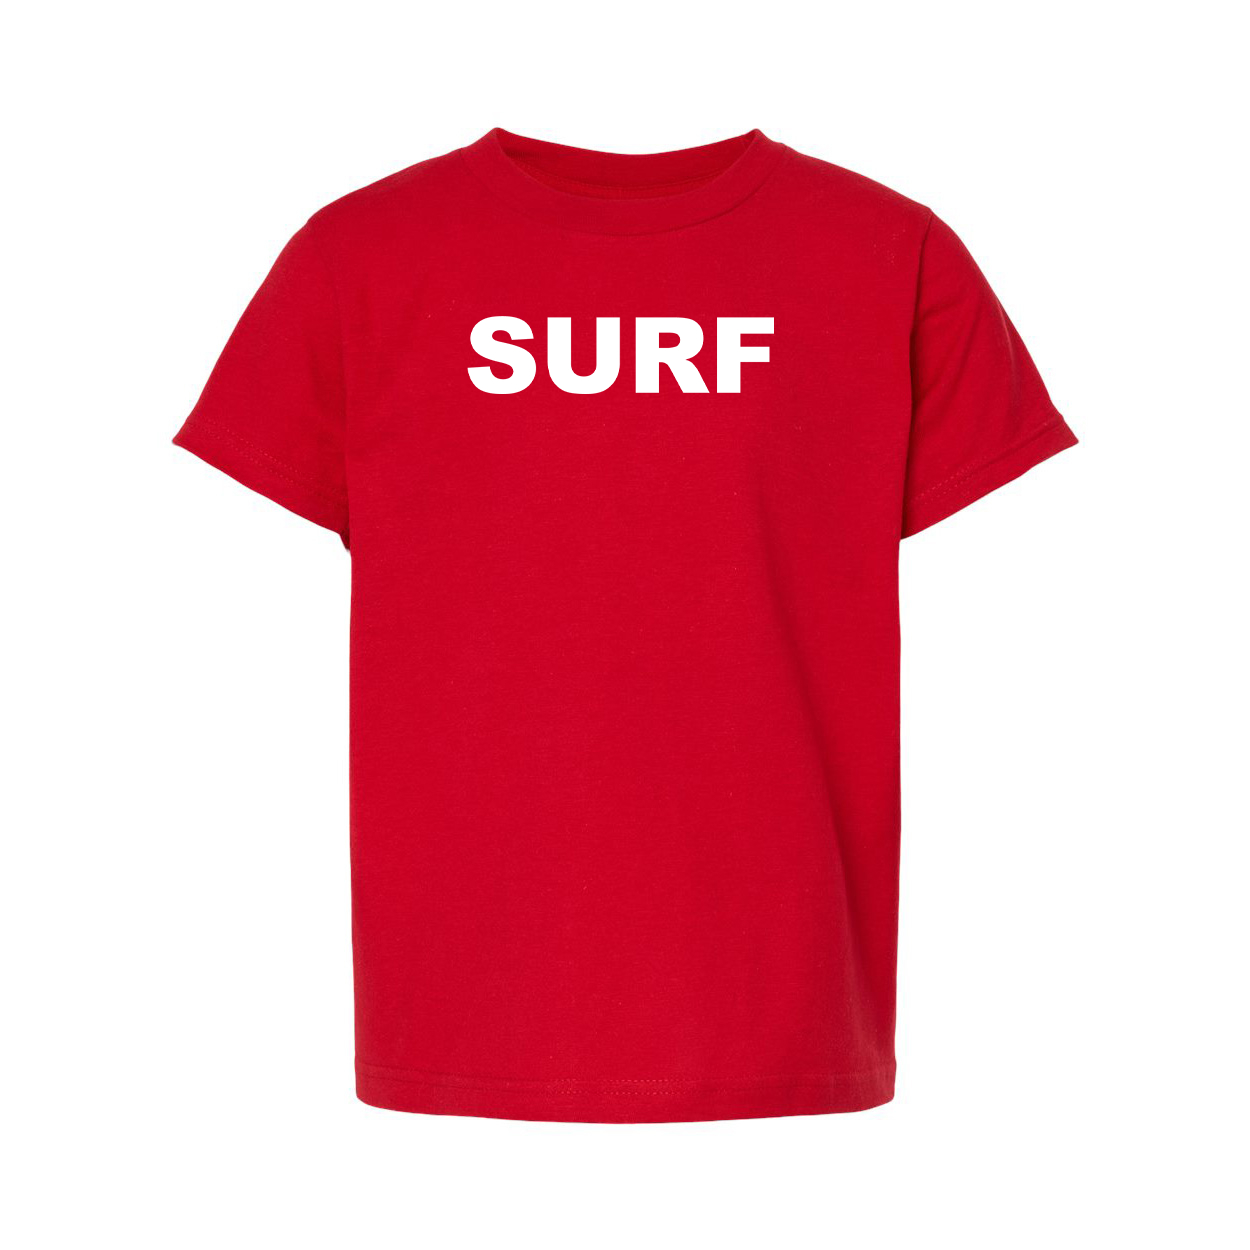 Surf Brand Logo Classic Youth Unisex T-Shirt Red 